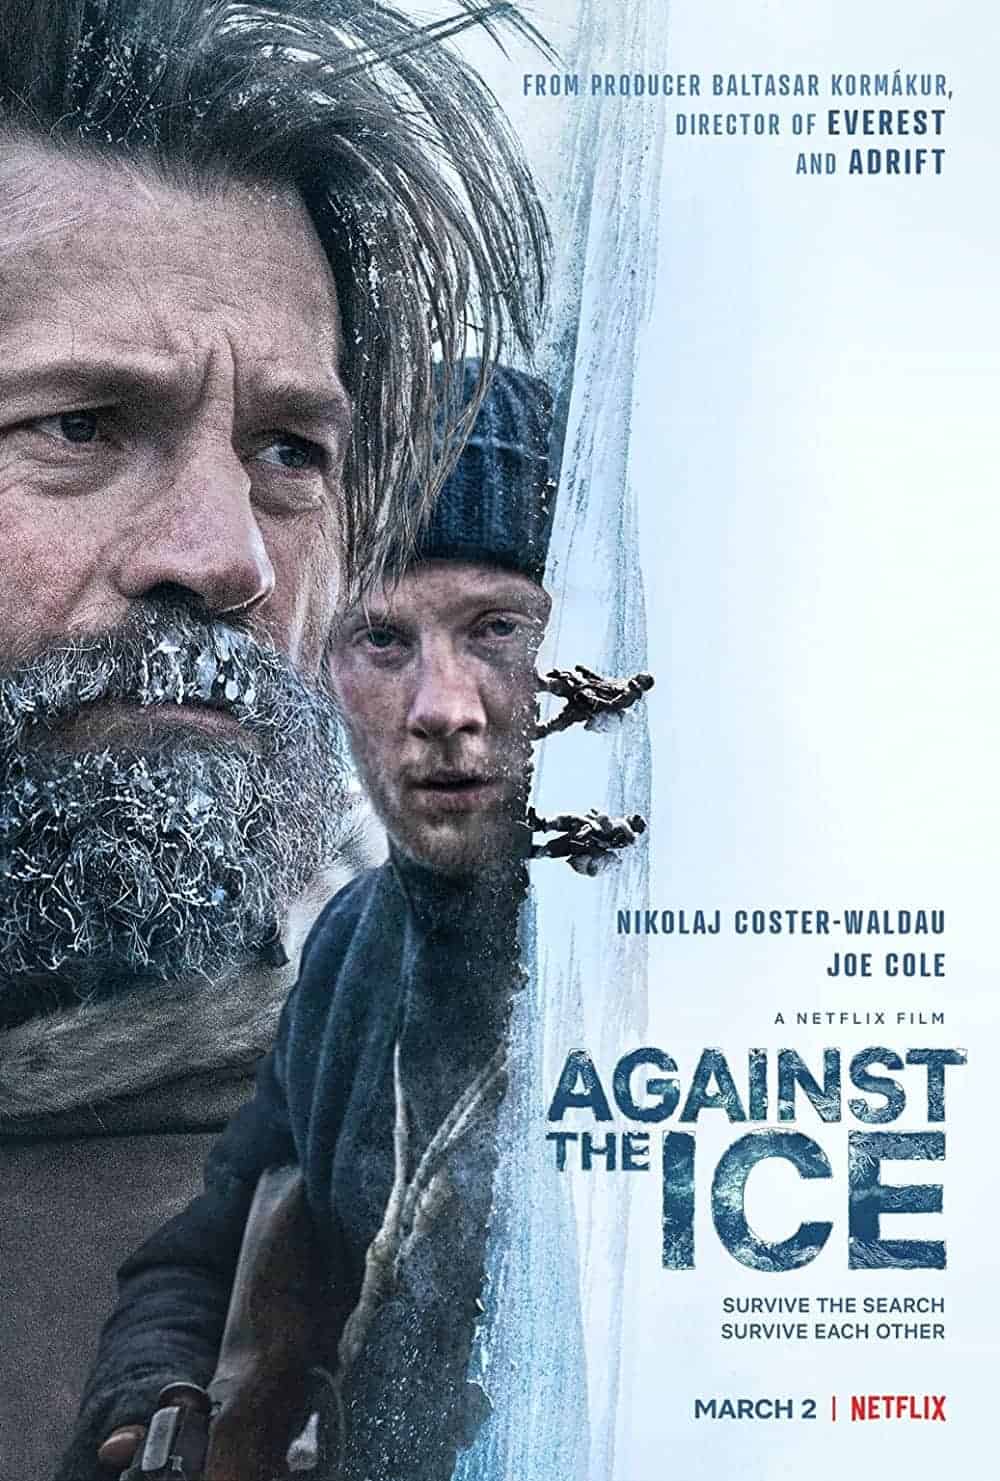 Against the Ice (2022) 15 Best Nature Movies to Add in Your Watchlist